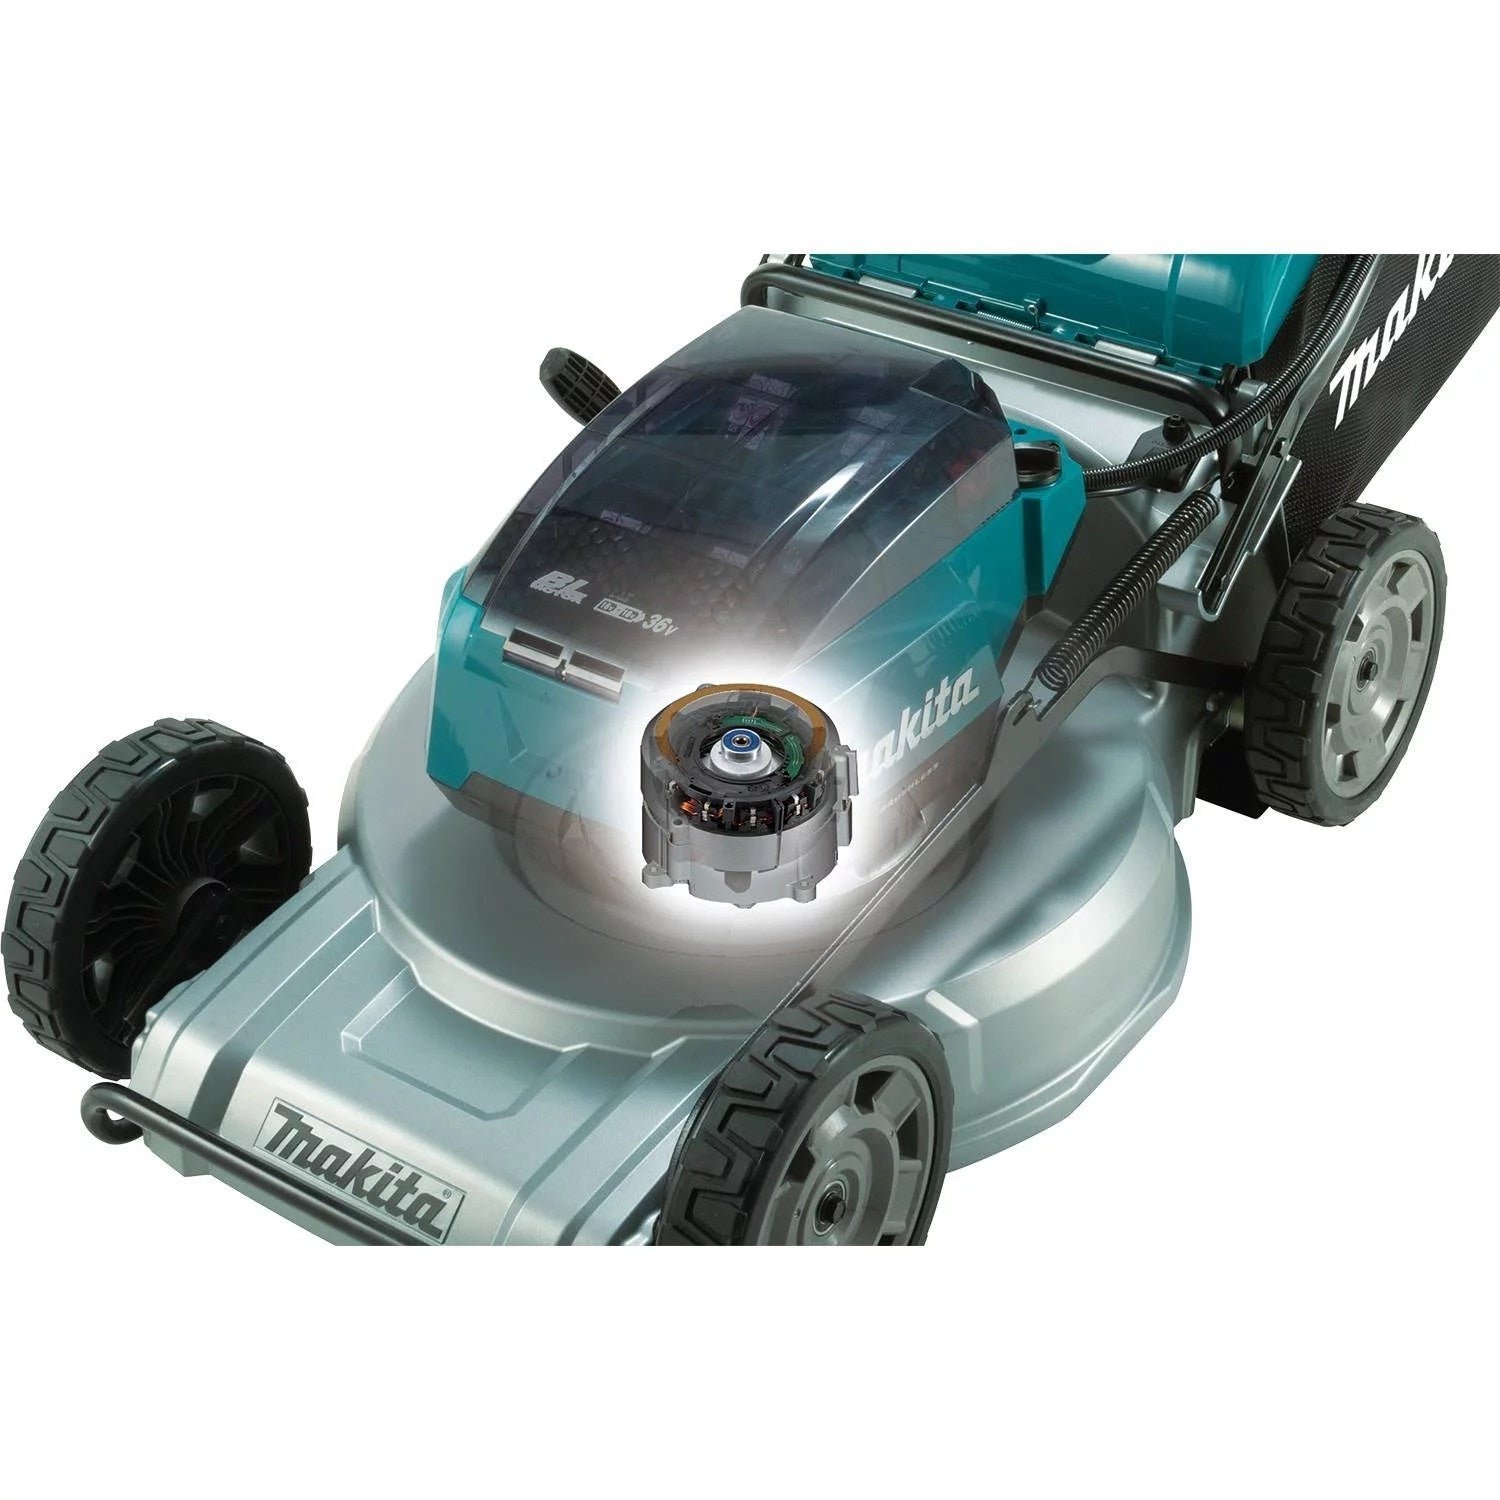 21 in. 18-Volt X2 (36-Volt) LXT Lithium-Ion Cordless Walk Behind Self Propelled Lawn Mower Kit with 4 Batteries (5.0 Ah)